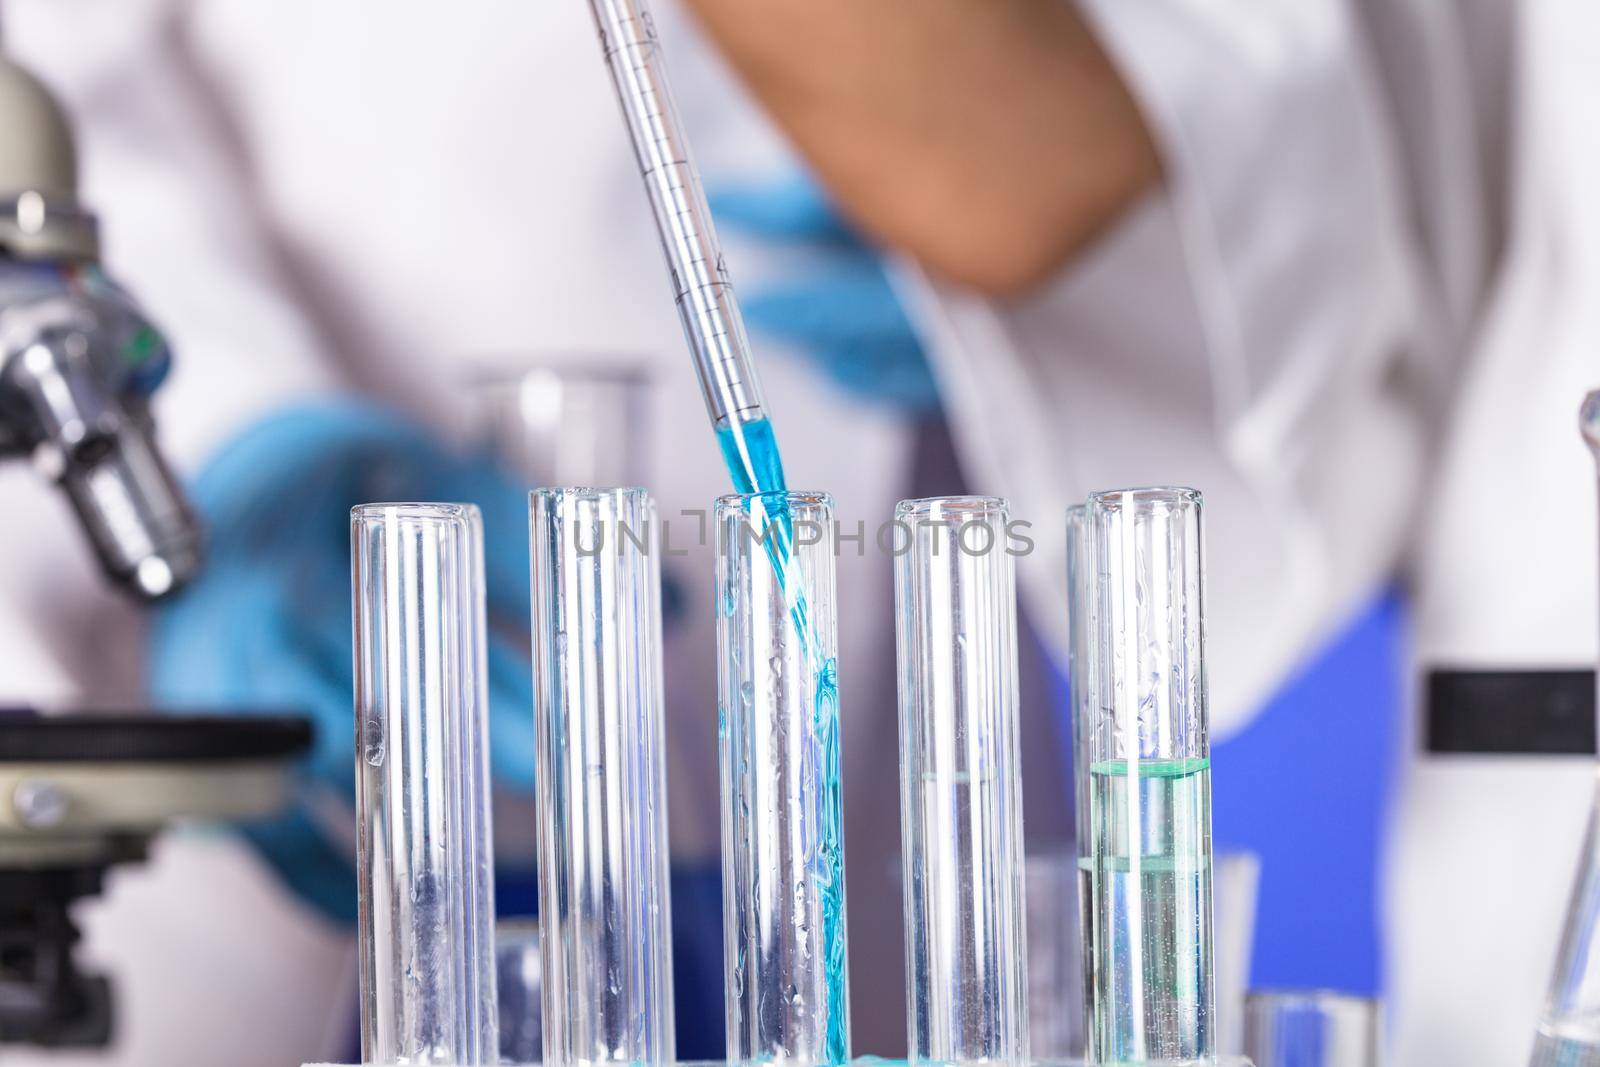 The blue drop from pipette in laboratory tubes